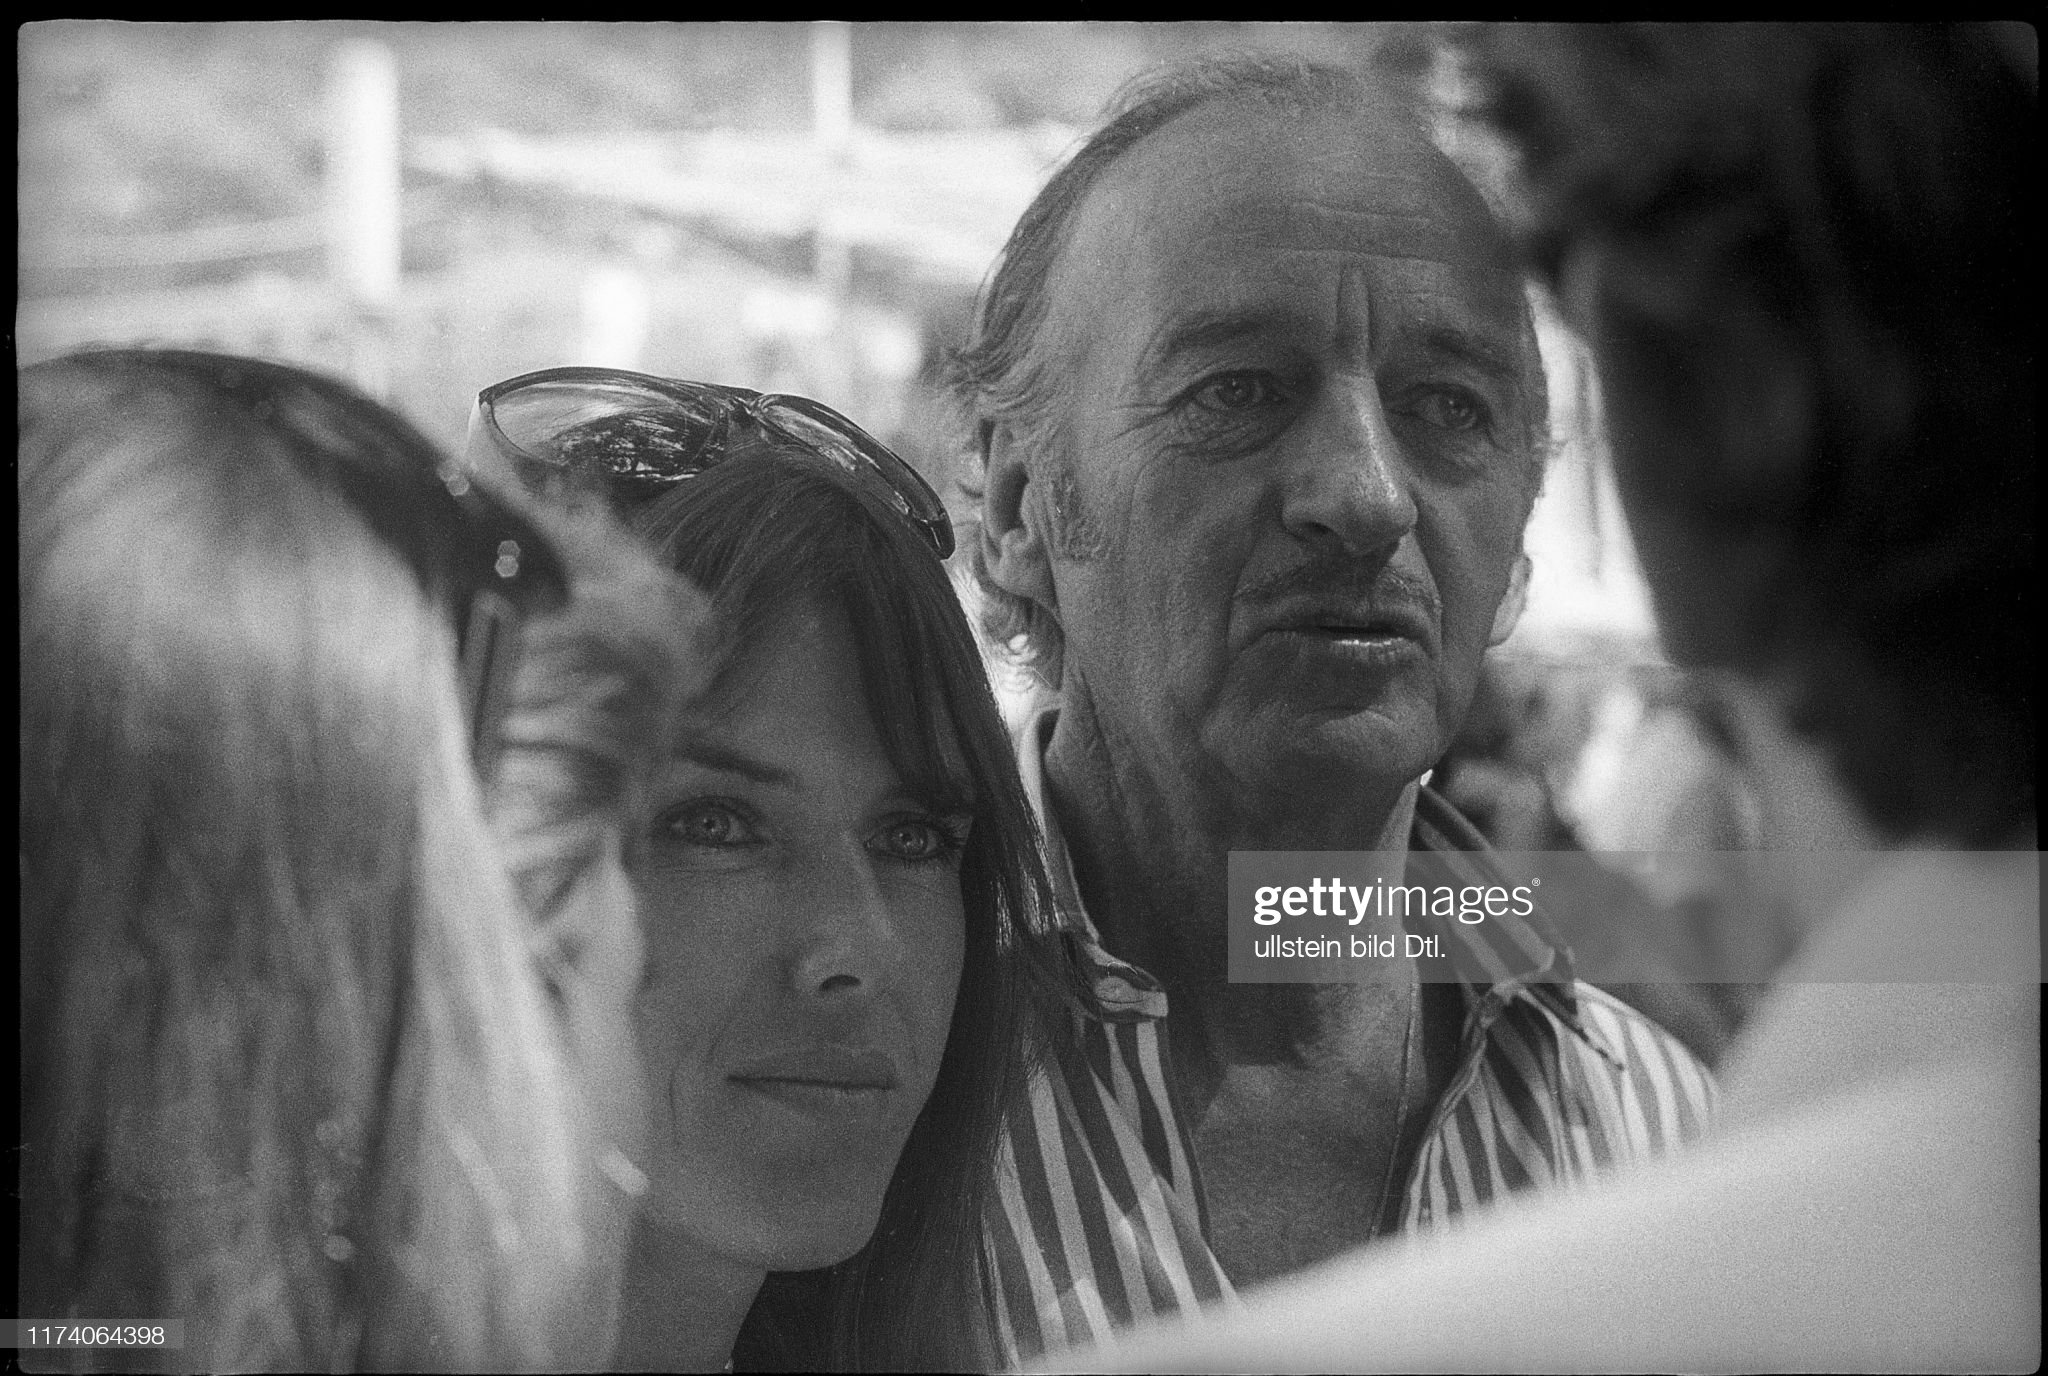 Helen Stewart with Alec Guinness at the 1974 Monaco Grand Prix.